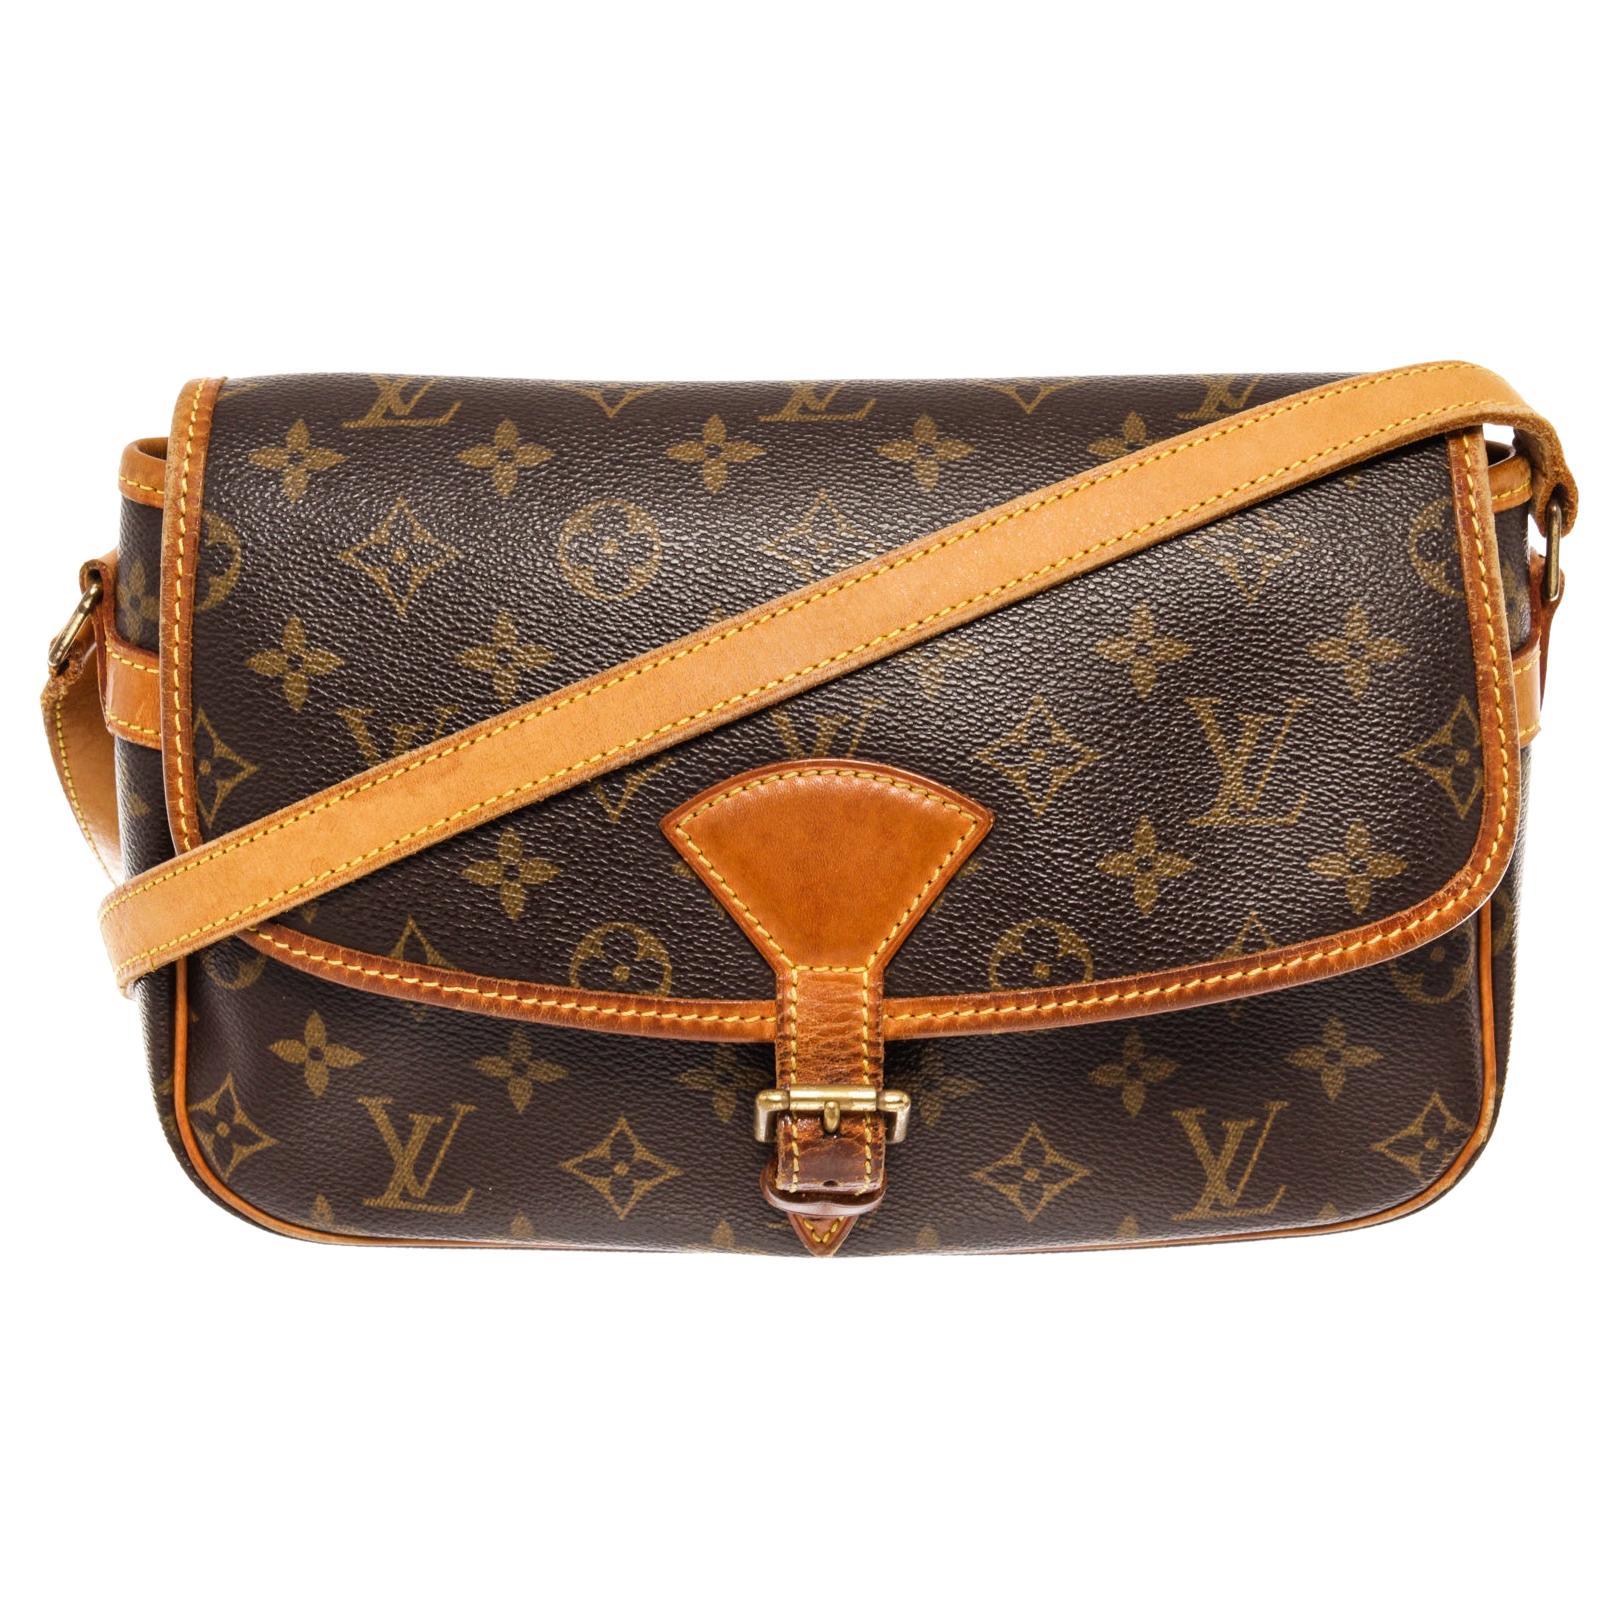 Brown and tan monogram coated canvas Louis Vuitton Sologne bag with brass